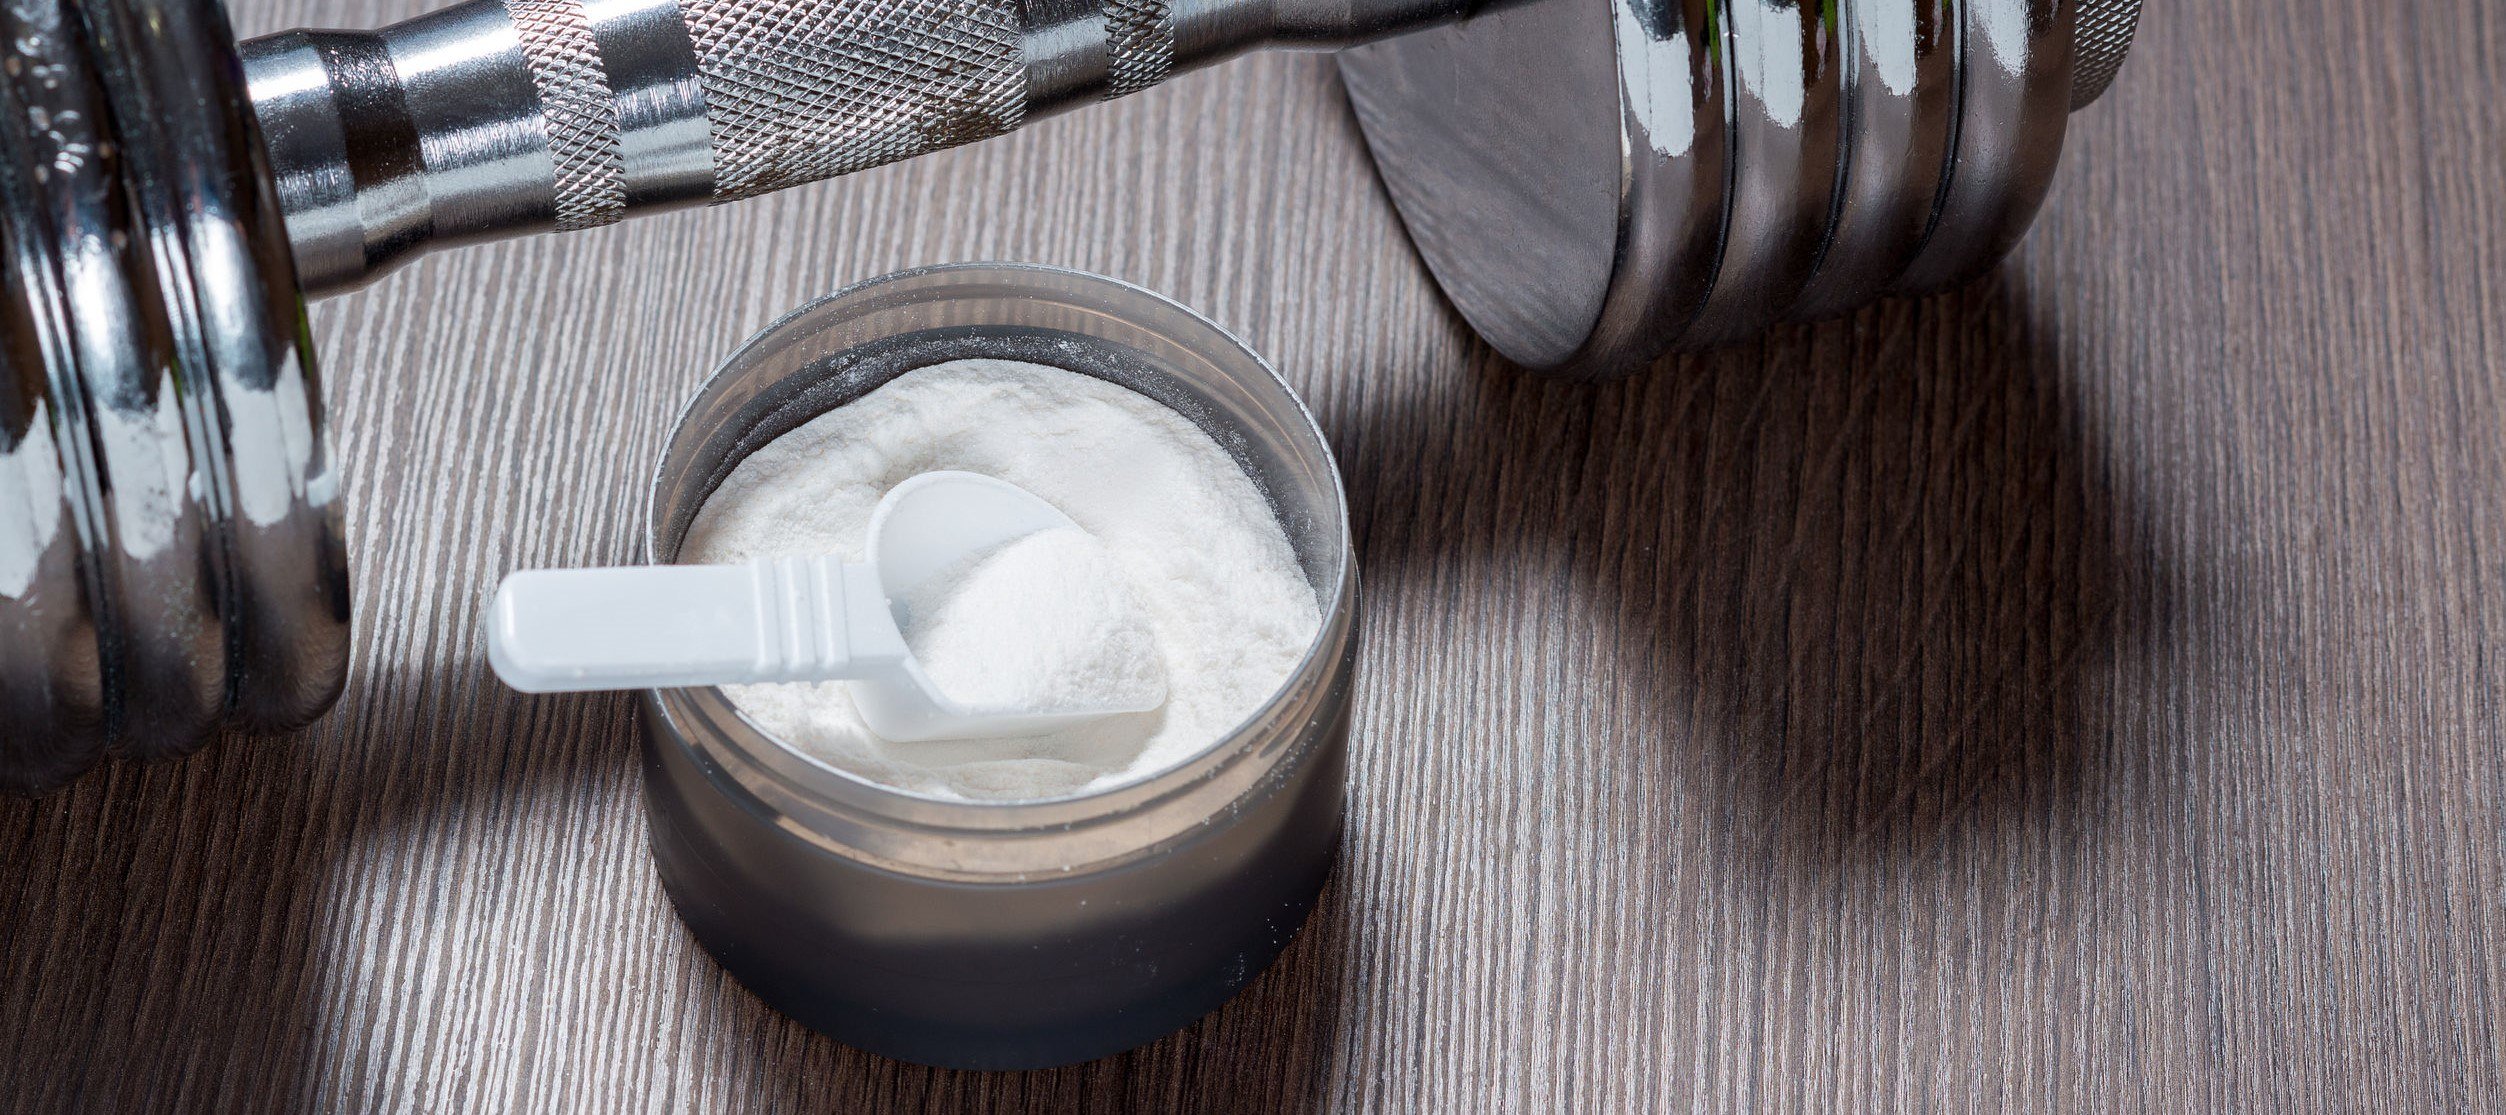 Creatine: The Supplement That Really Works